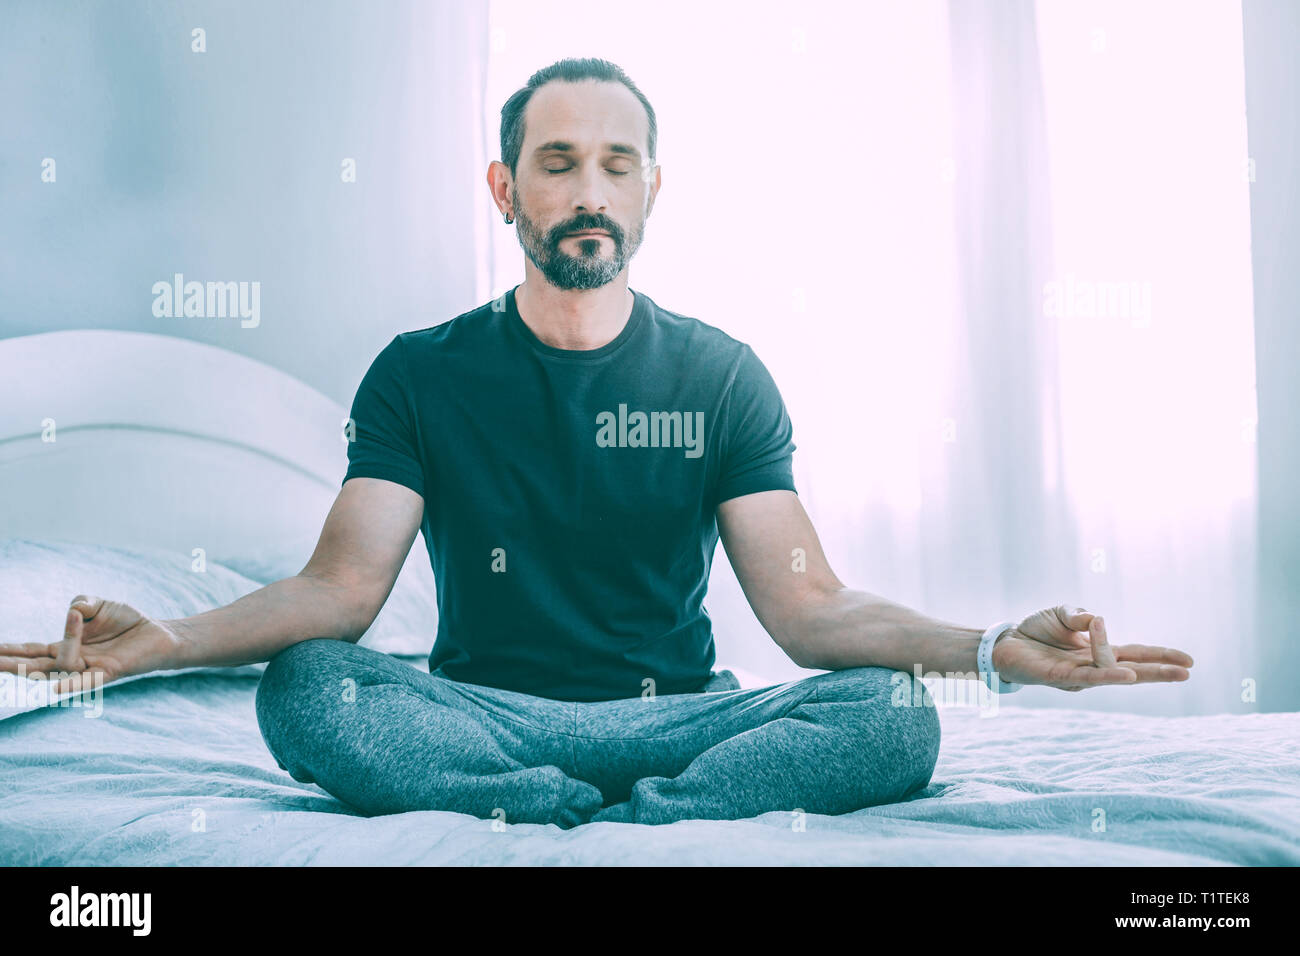 Relaxed concentrated man meditating in a room Stock Photo